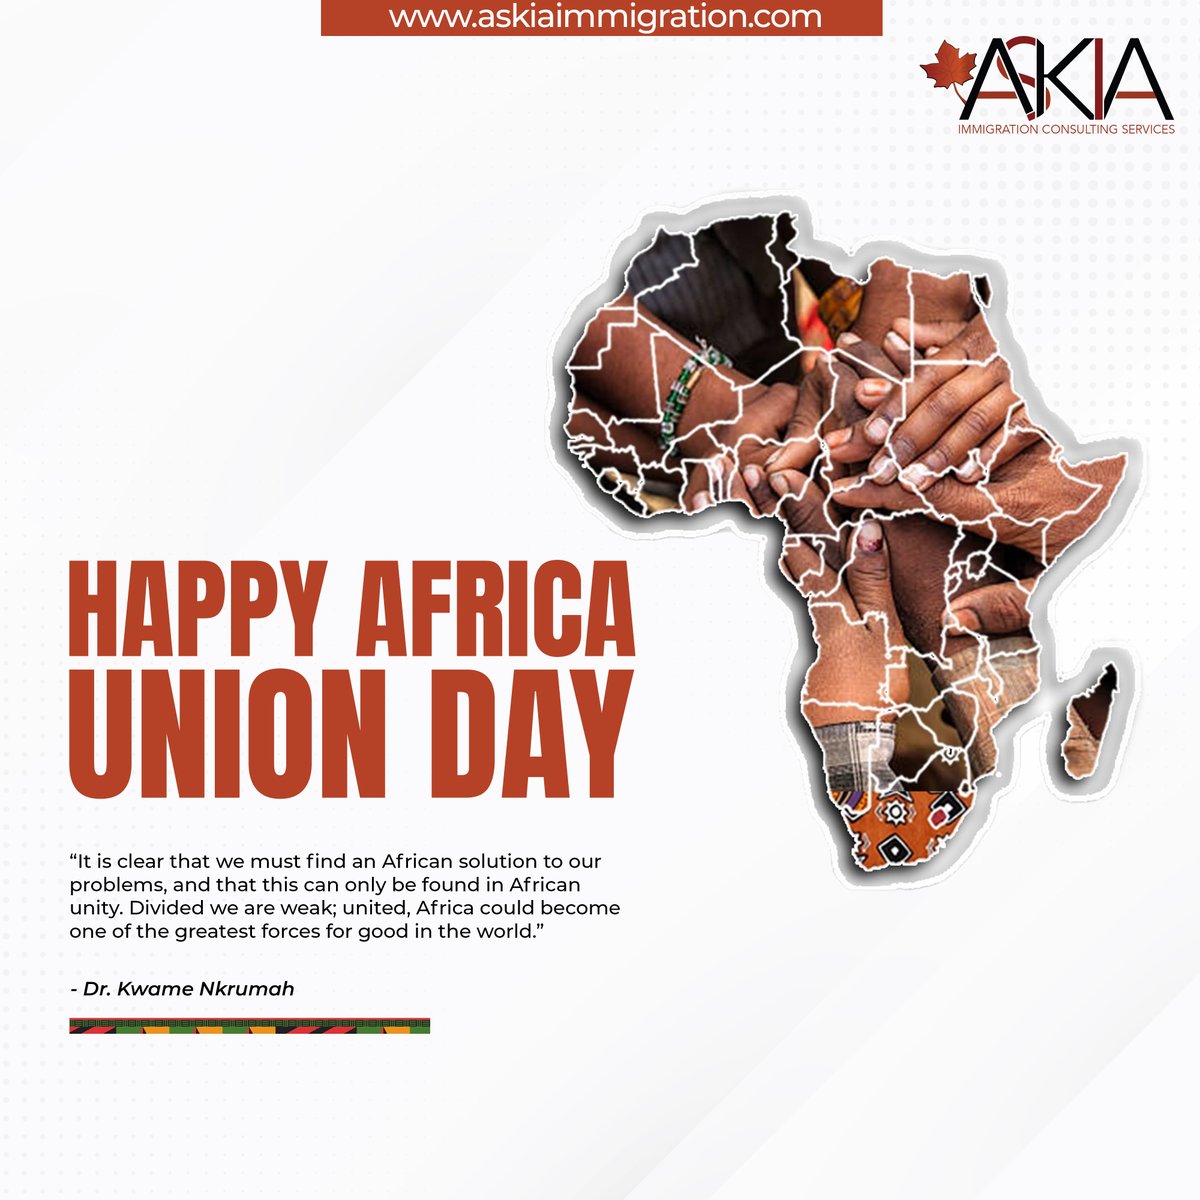 'Africa must Unite'
#africanday #africaunionday #May25th